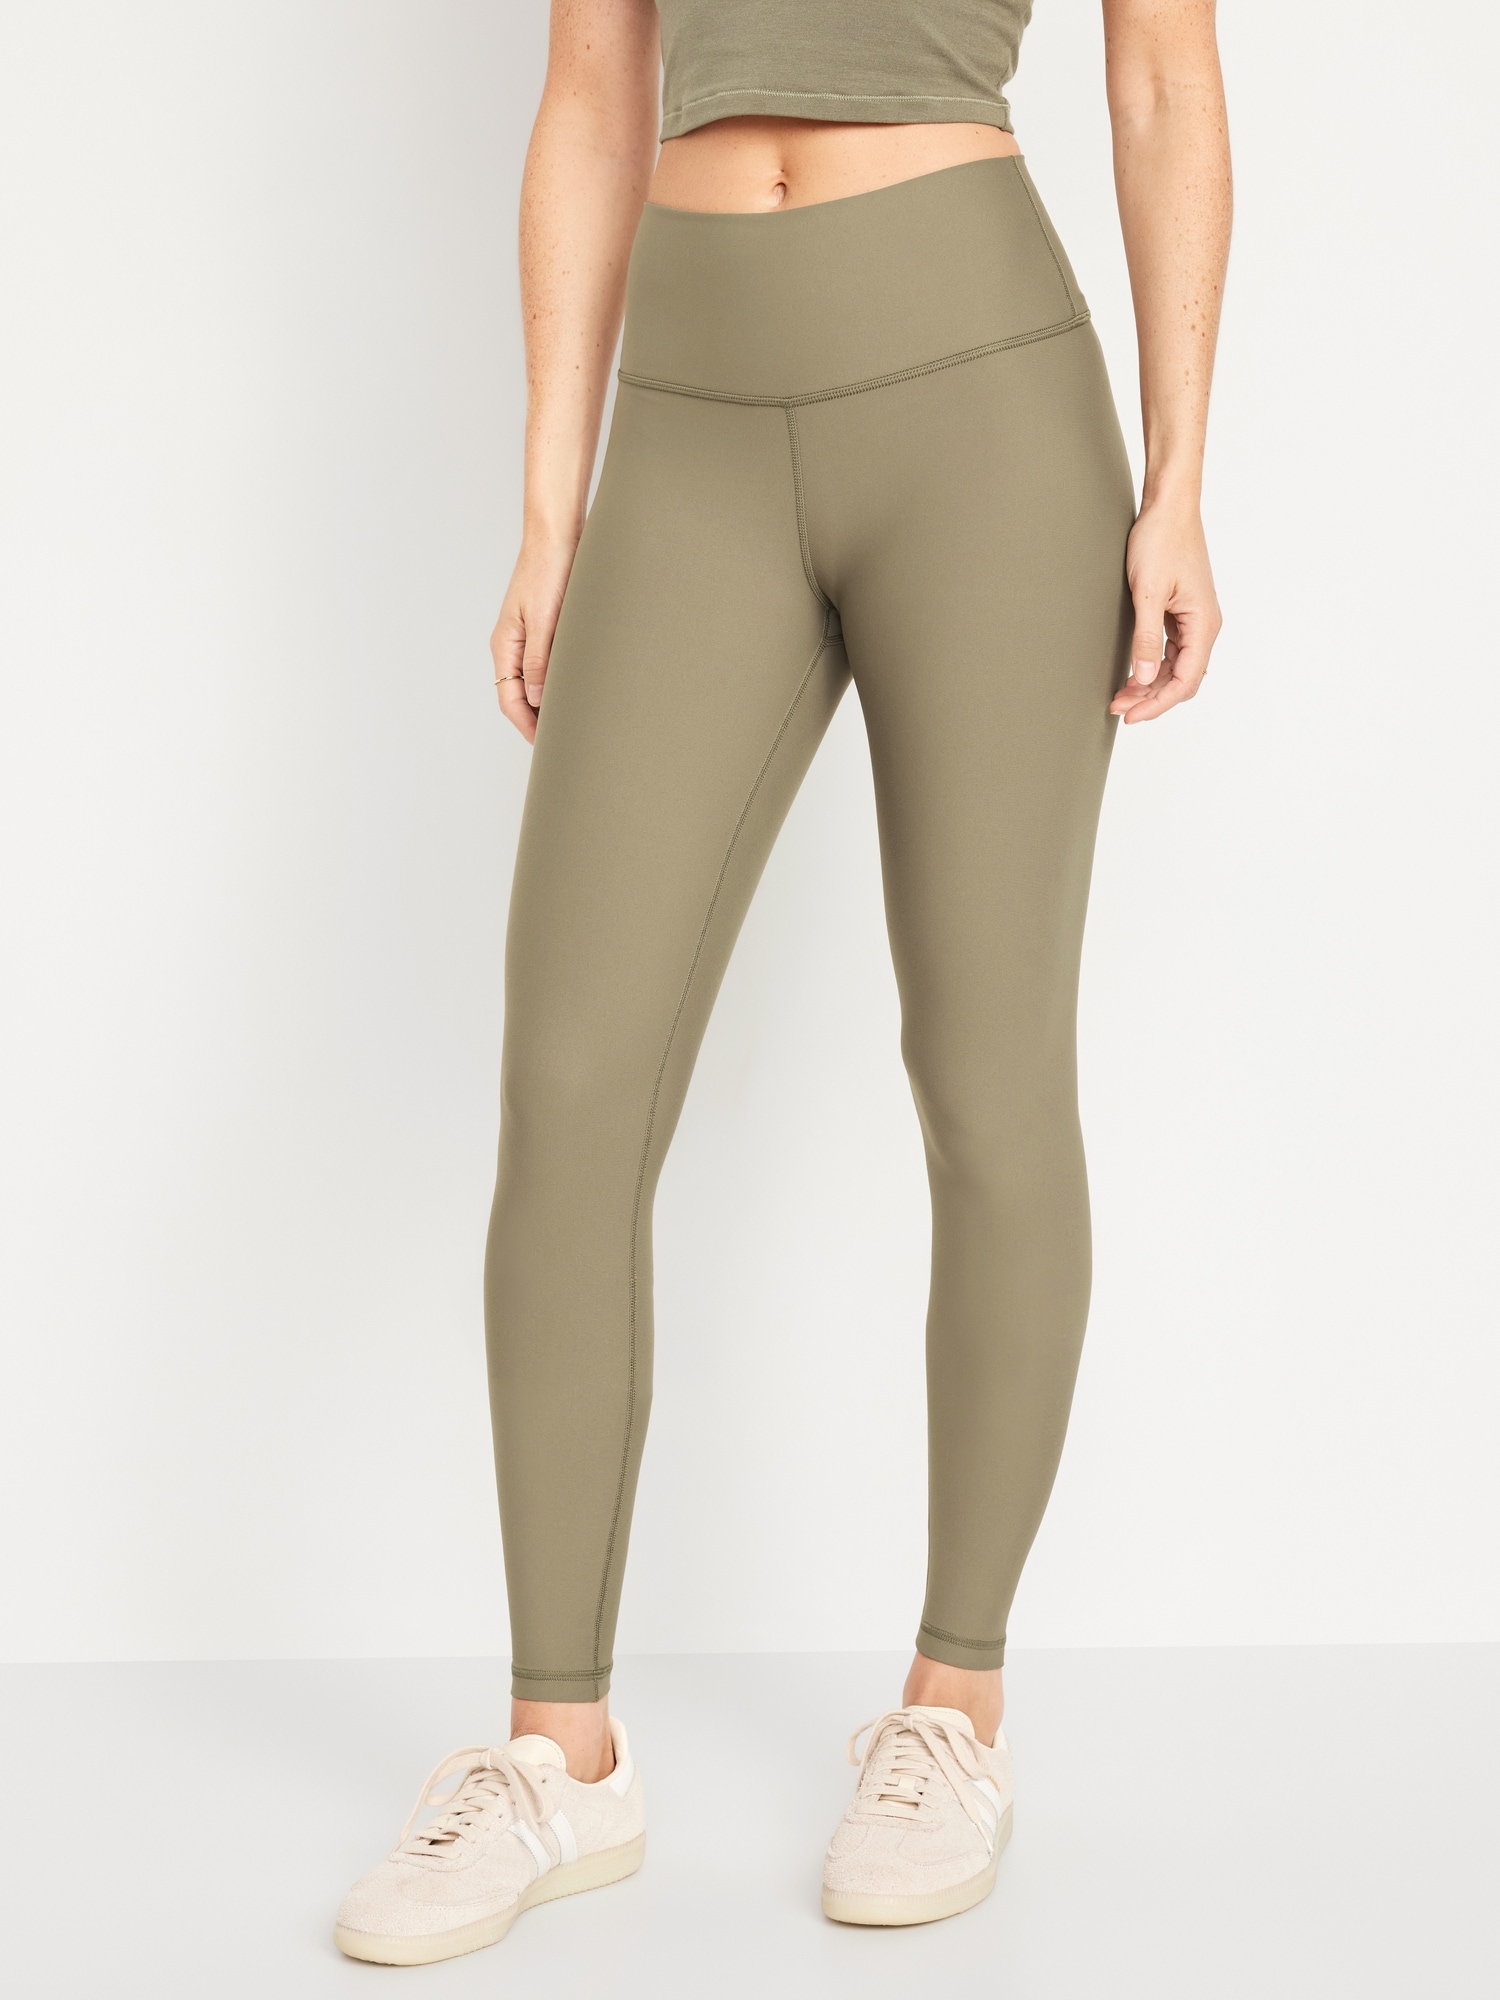 Old Navy Extra High-Waisted PowerSoft Leggings Black gold